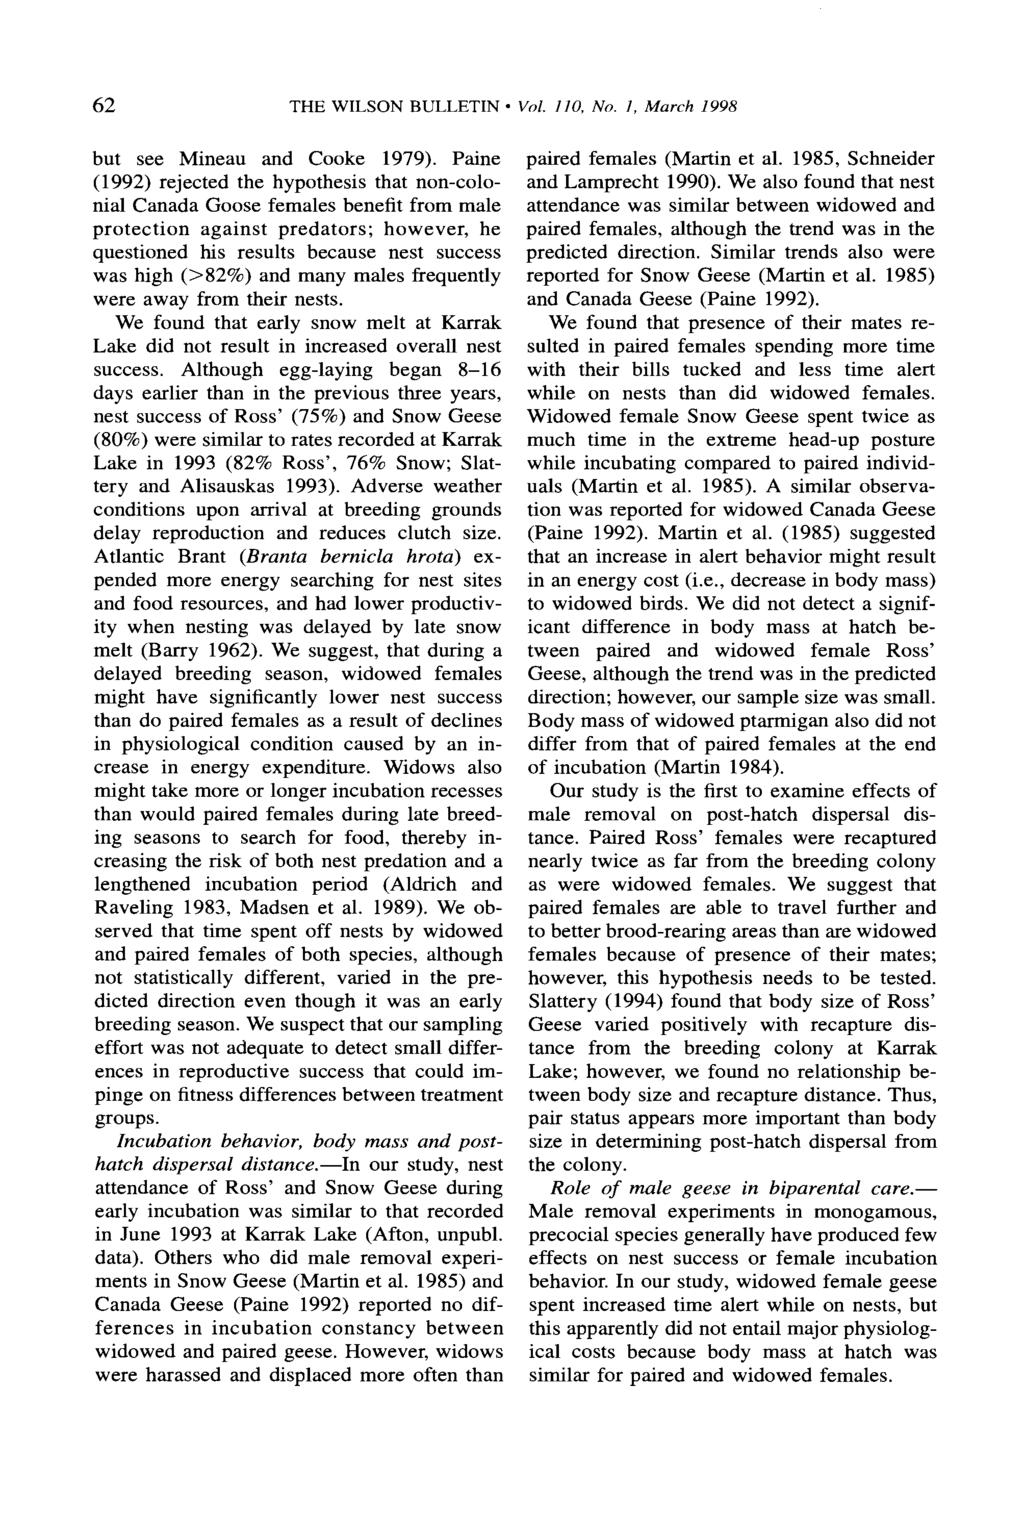 62 THE WILSON BULLETIN - Vol. 110, No. 1, March 1998 but see Mineau and Cooke 1979). Paine paired females (Martin et al.